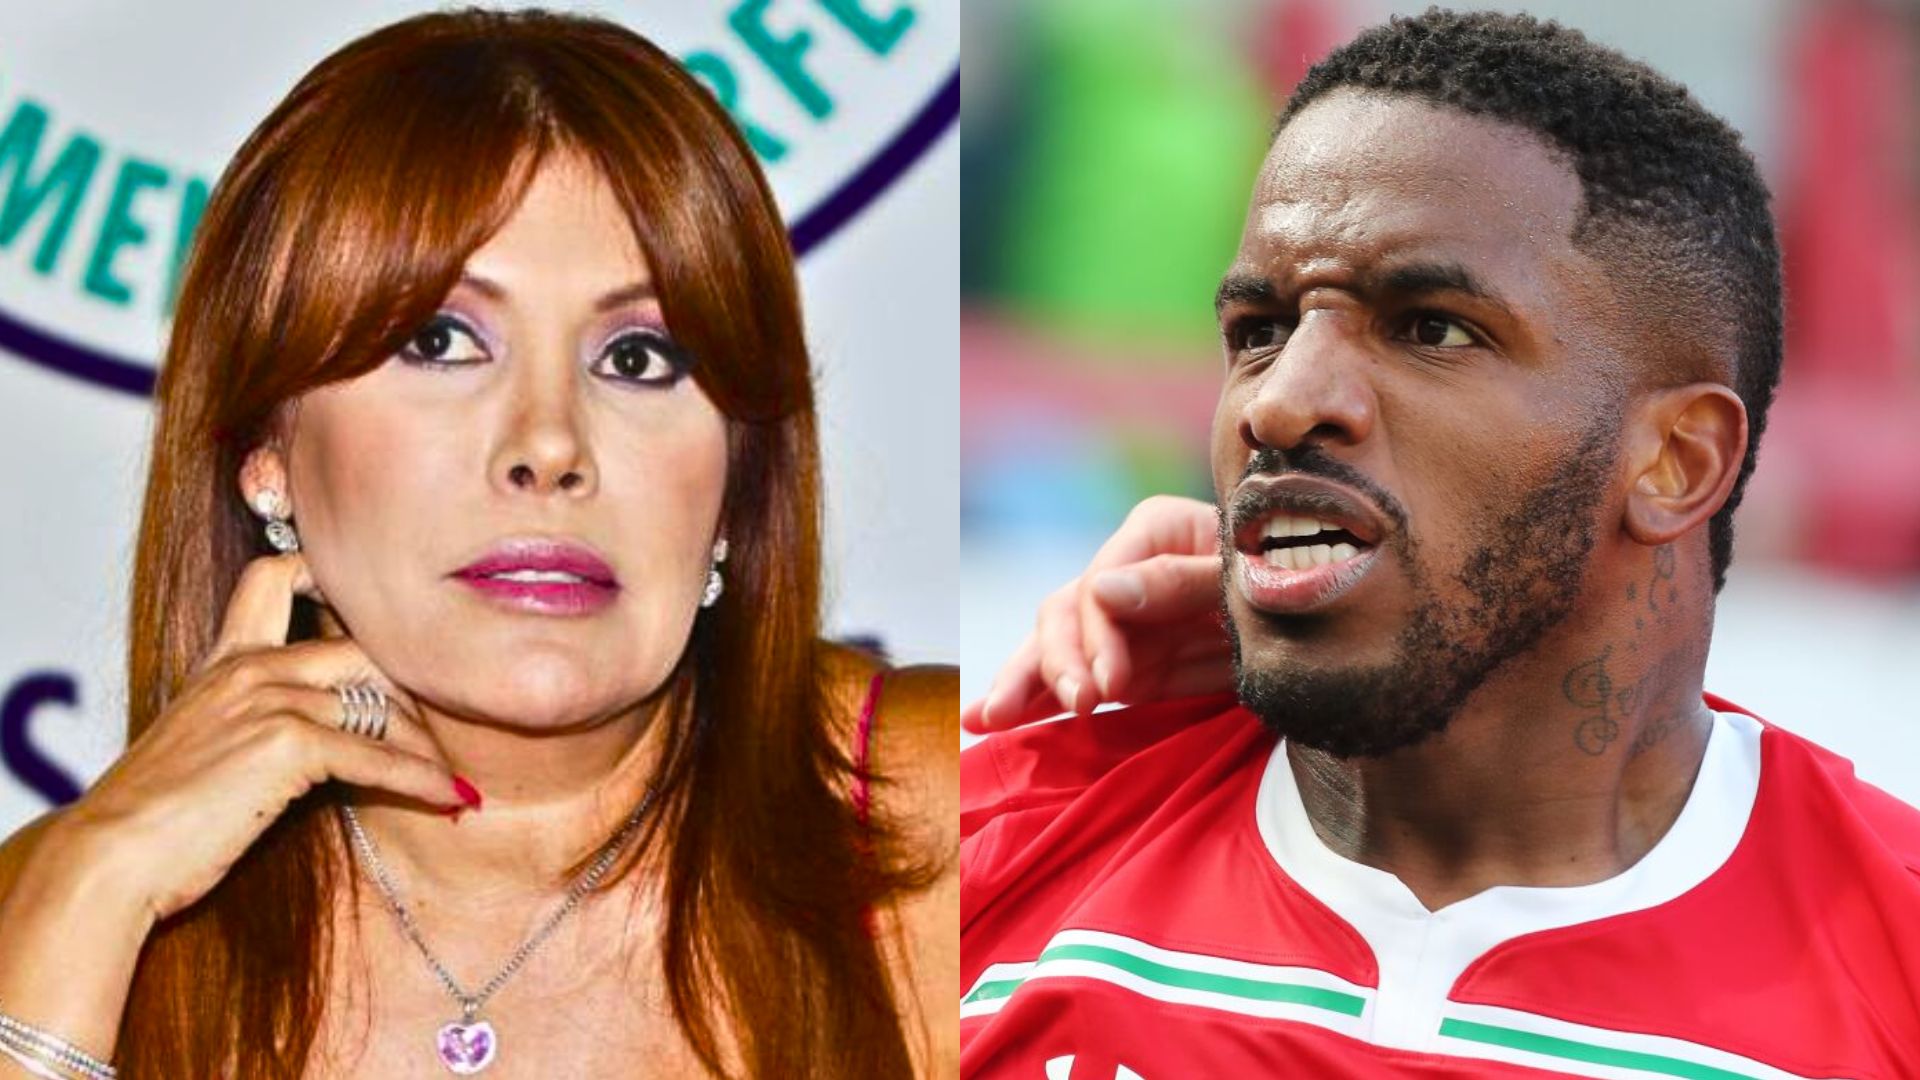 Magaly Medina responded clearly and strongly to Jefferson Farfán.